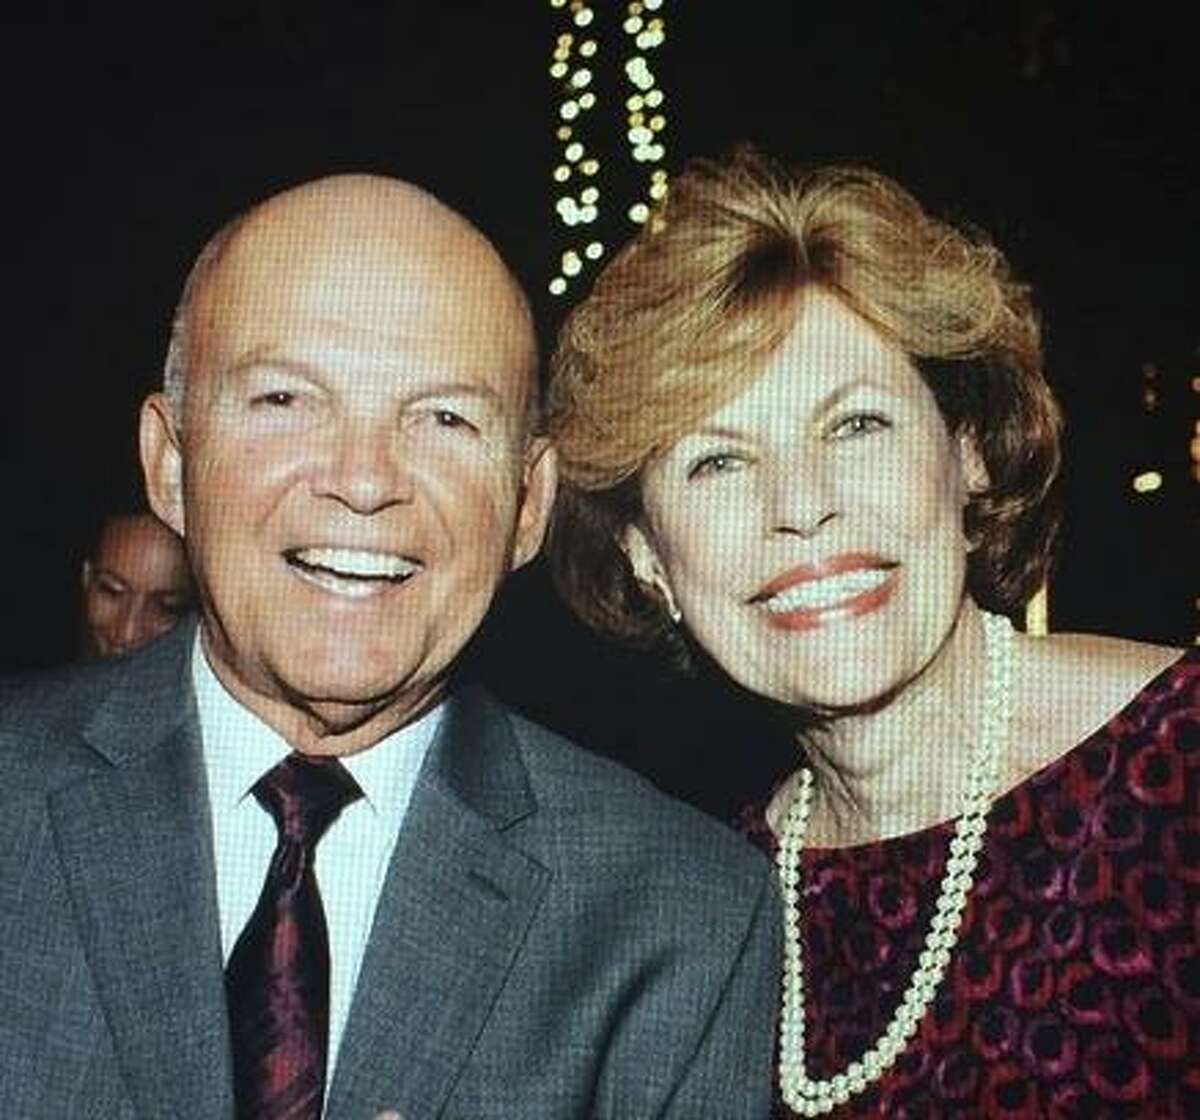 A family photo of Carmen Caldentey Berriz, left, amd Armando Berriz, right. Carmen Caldentey Berriz died on the morning of October 9, 2017, after battling against fire, dense smoke, and blowing embers for several hours in a swimming pool in Santa Rosa with her husband of 55 years, Armando A. Berriz. Armando Berriz survived the night but was severely burned during the ordeal.